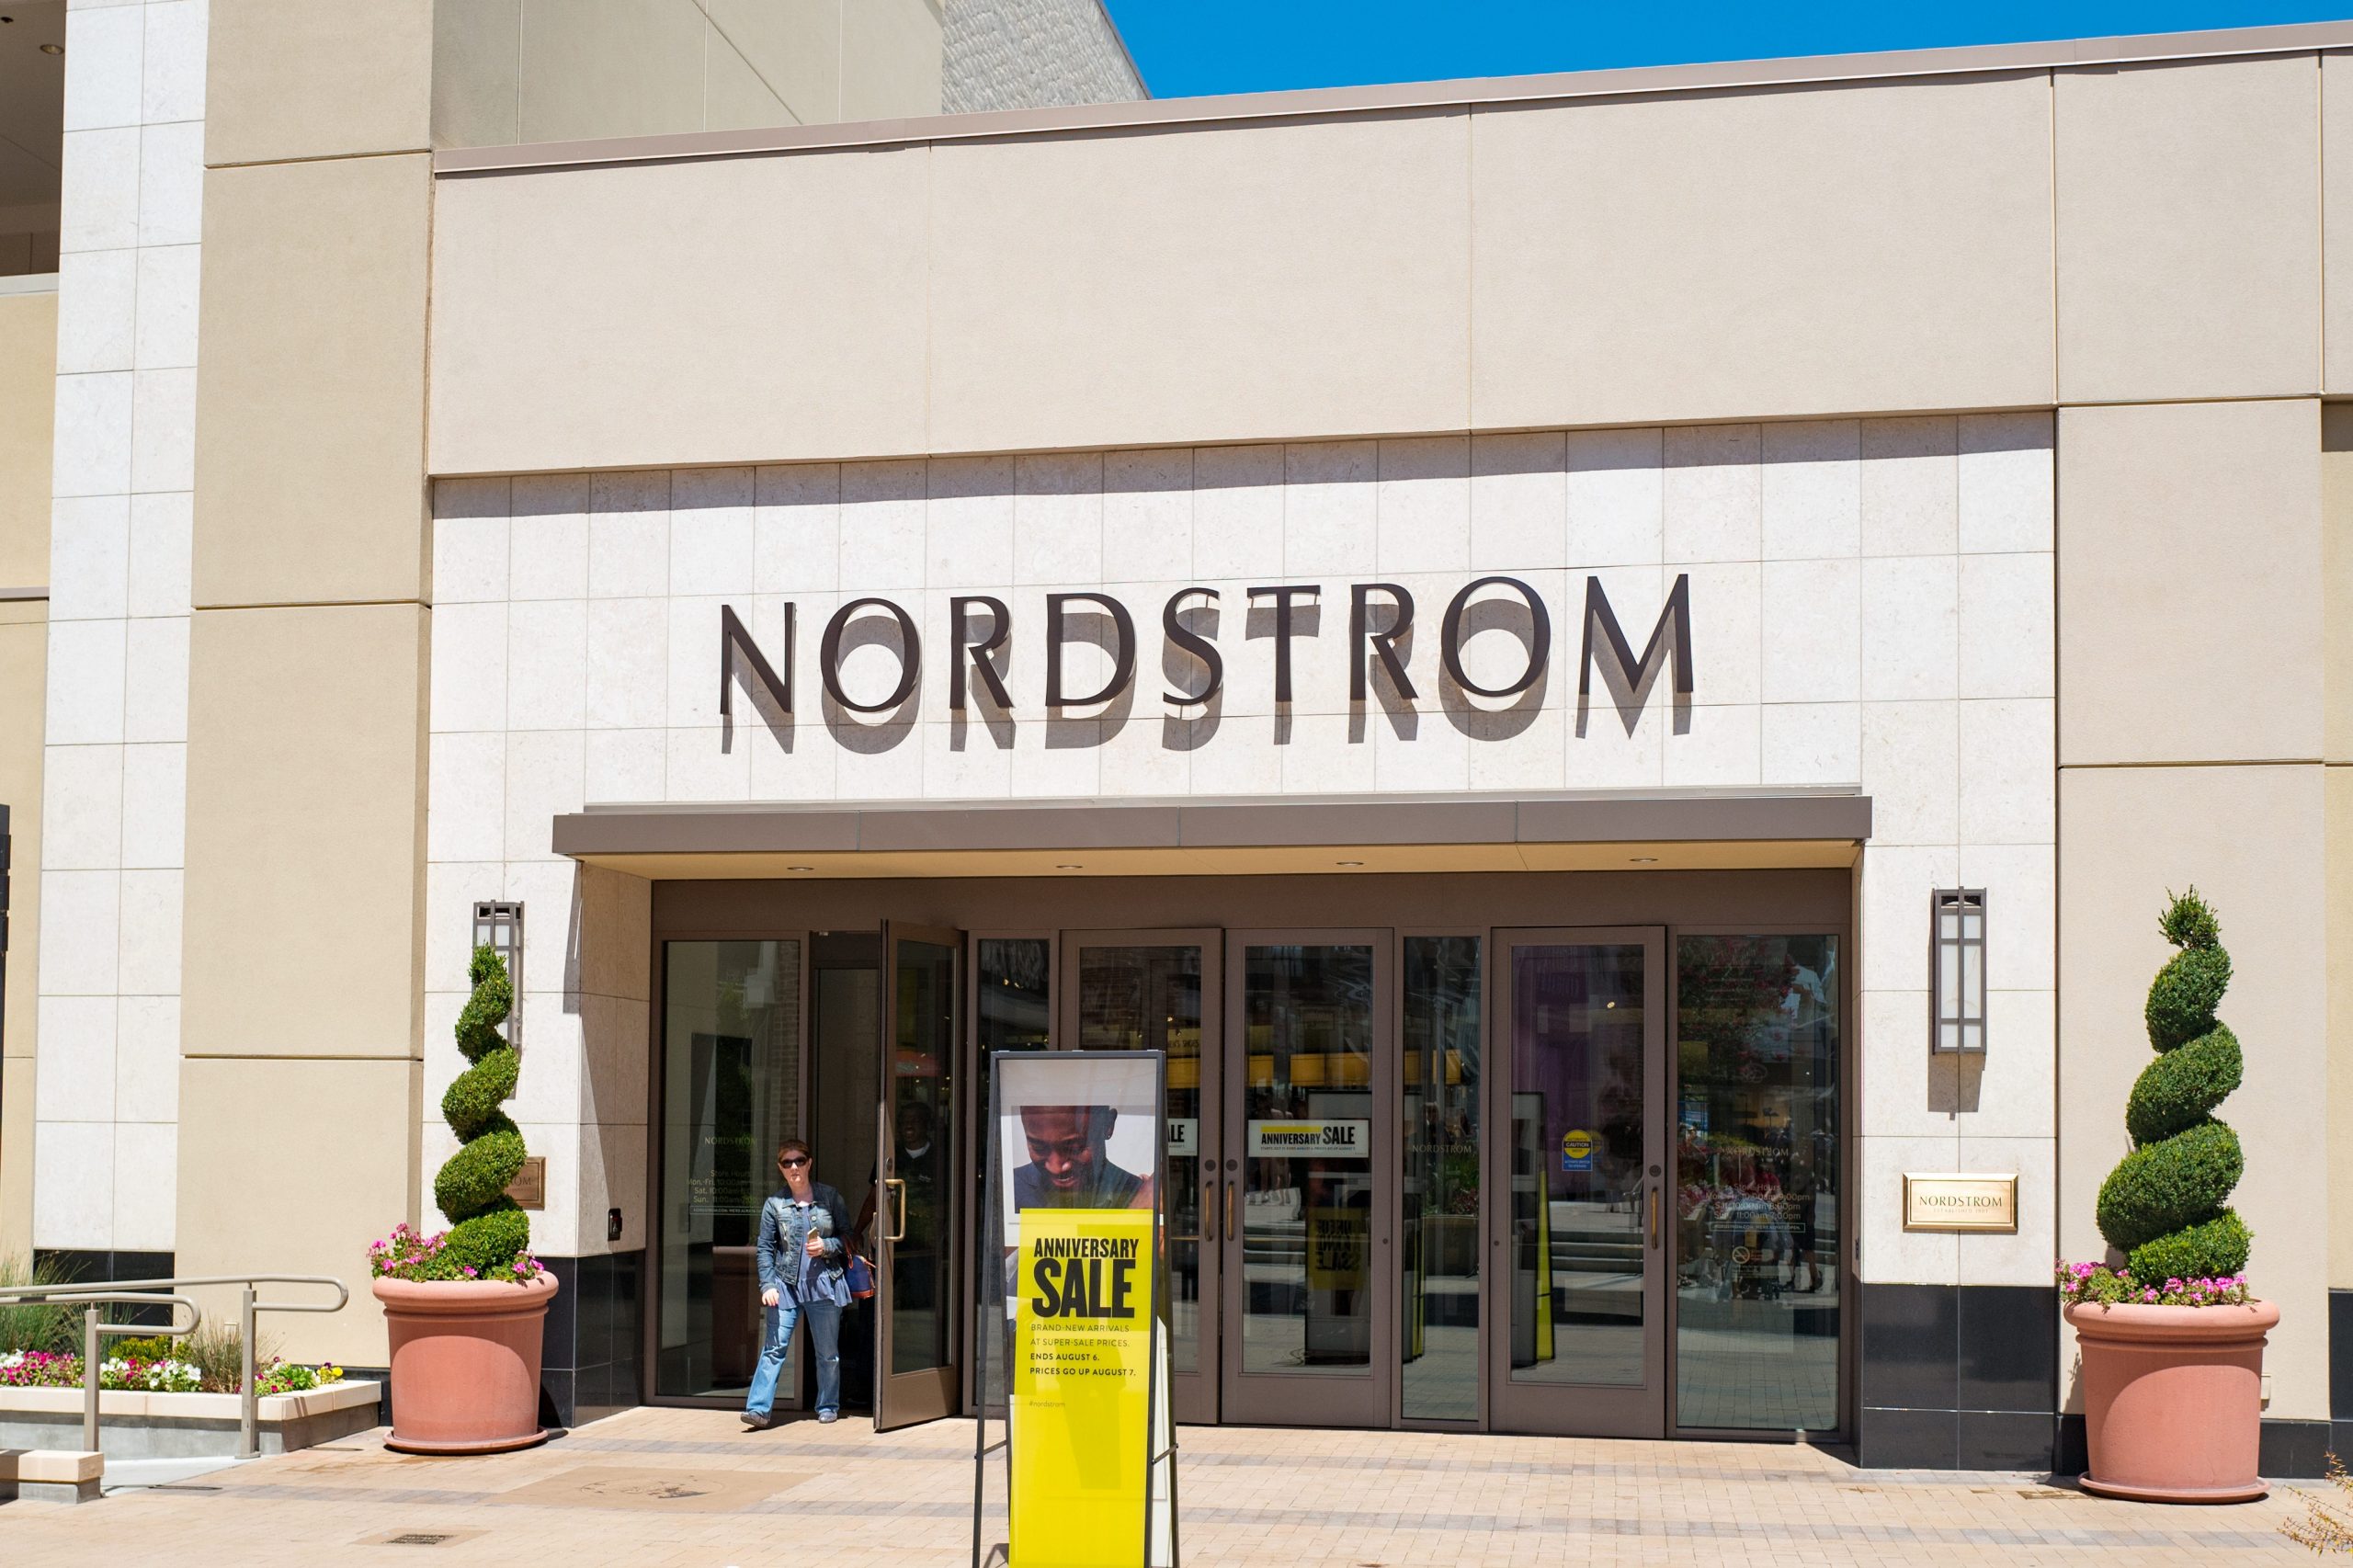 Nordstrom department store, with logo and signage, in the upscale Broadway Plaza shopping center in downtown Walnut Creek, California.